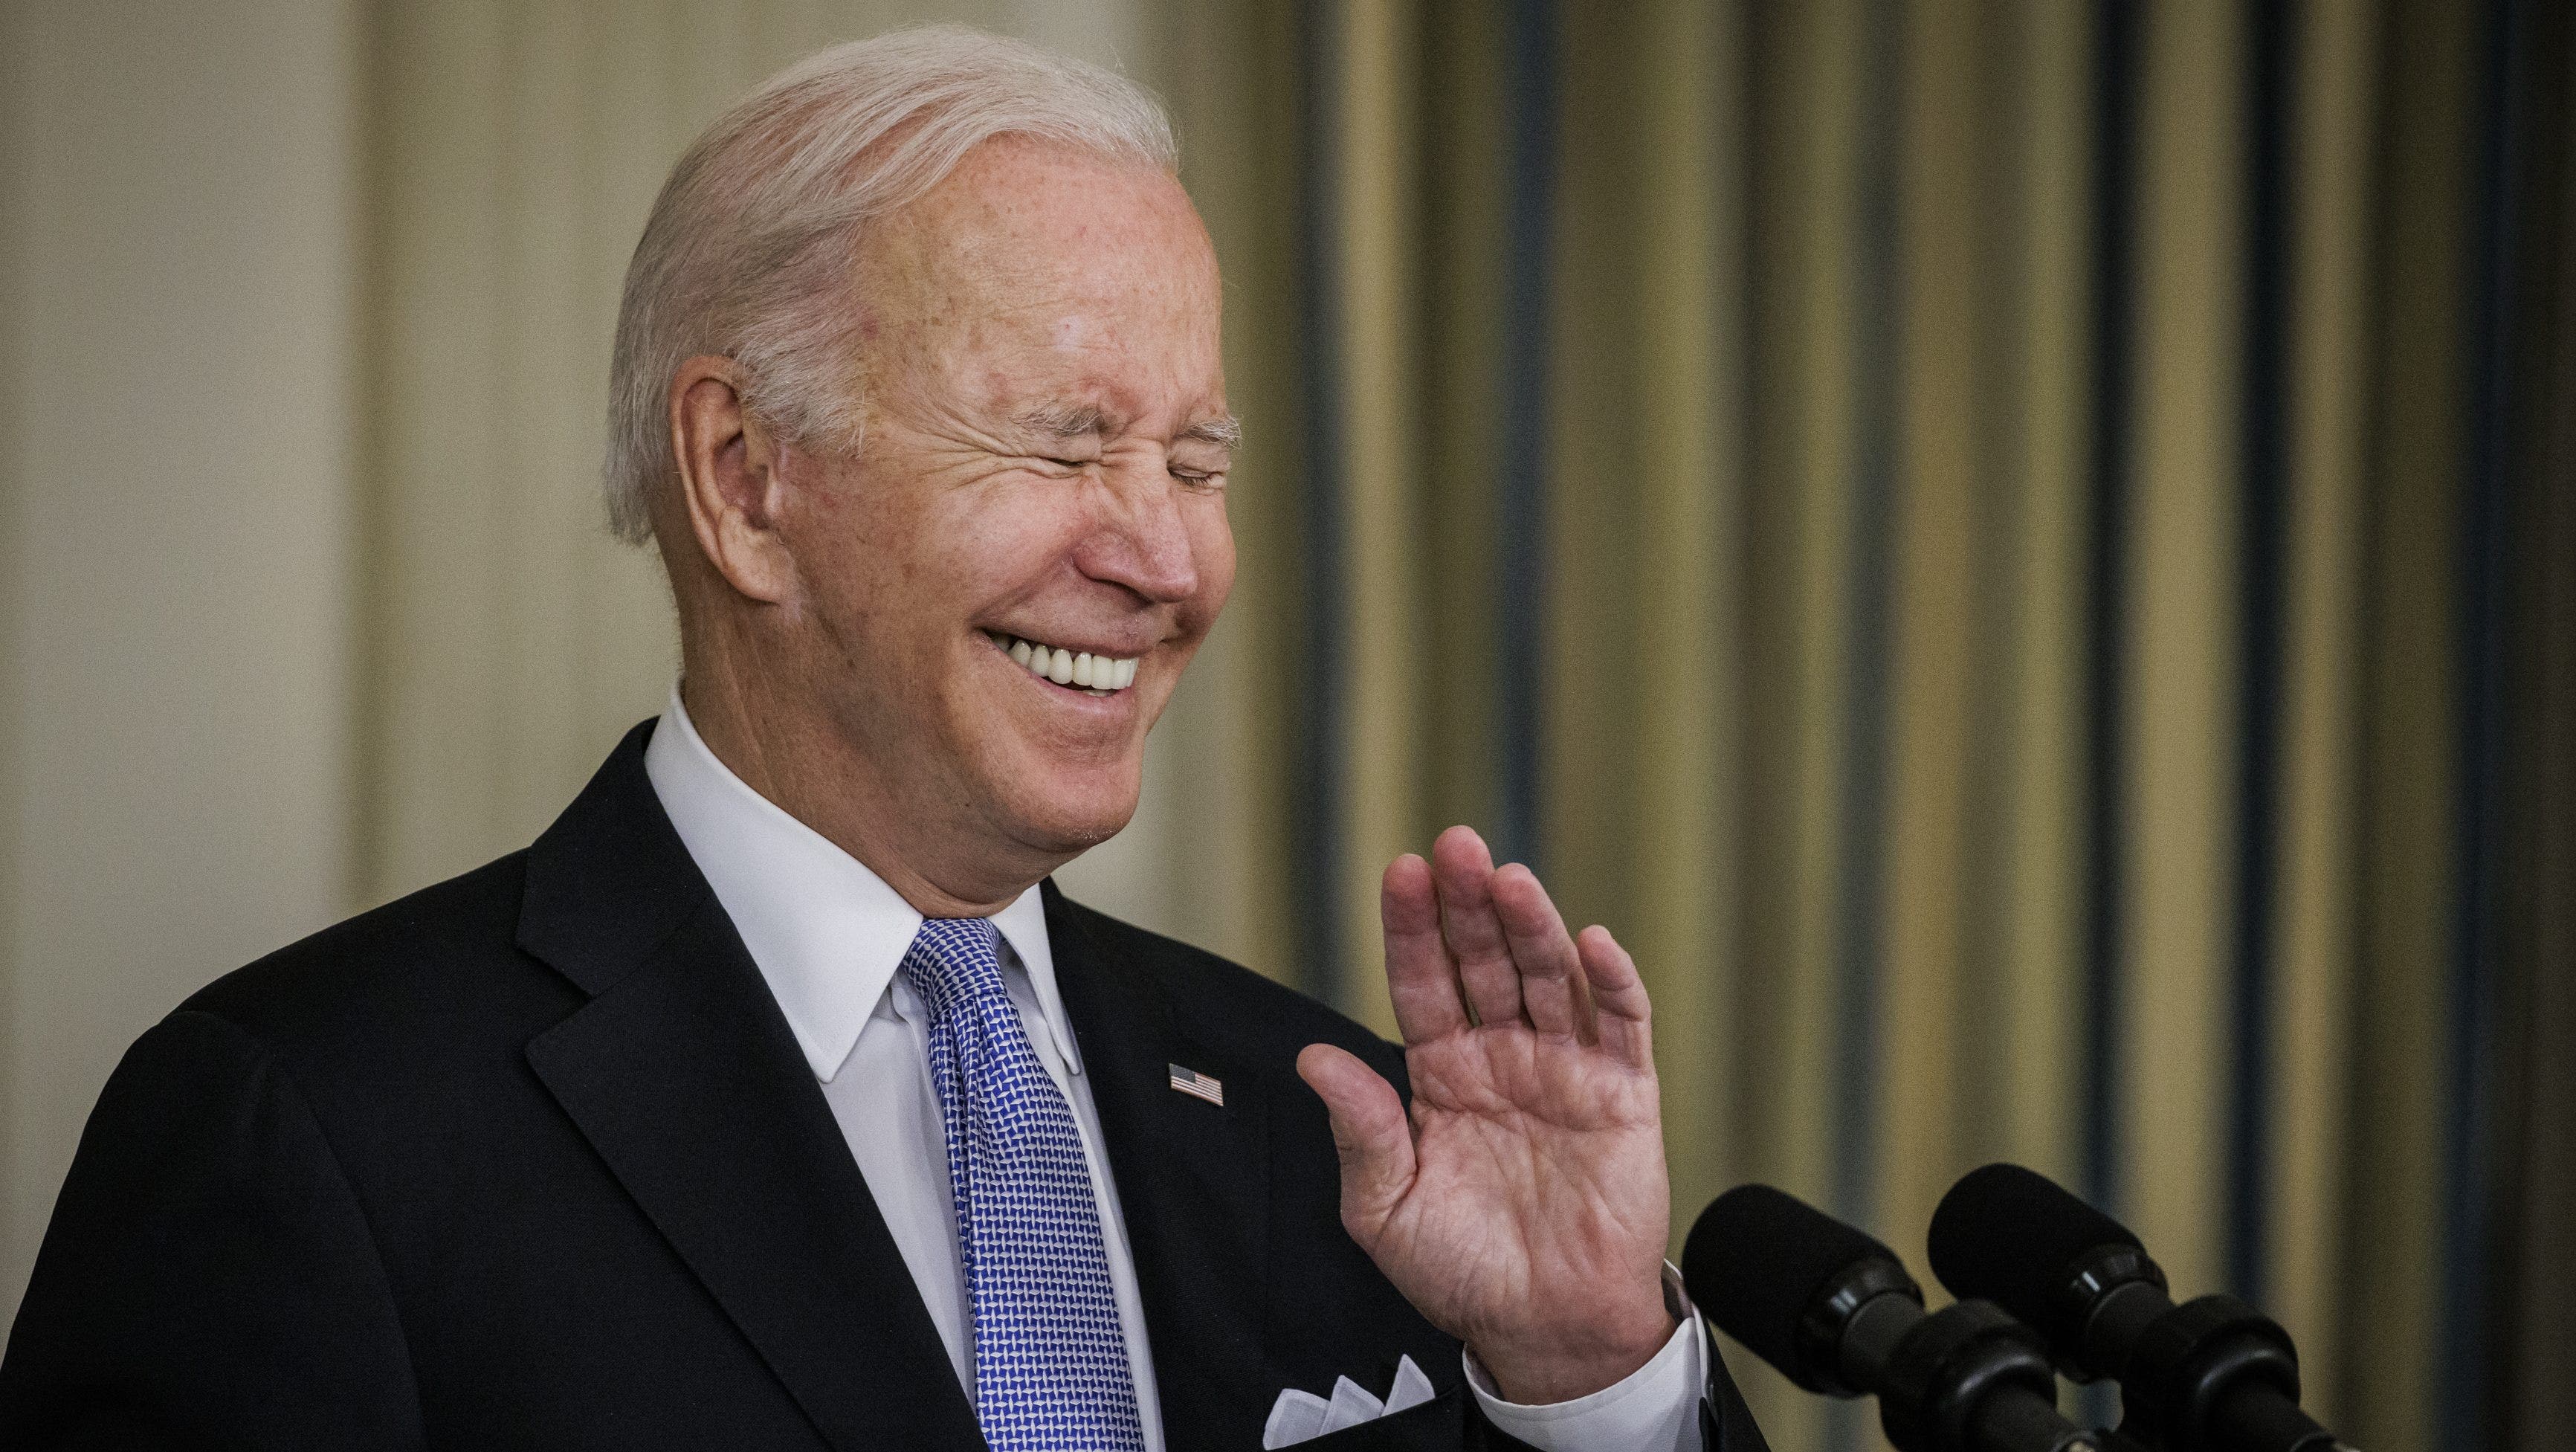 Biden appears to mock Americans' intelligence, questions whether 'they'd understand' supply chain issues